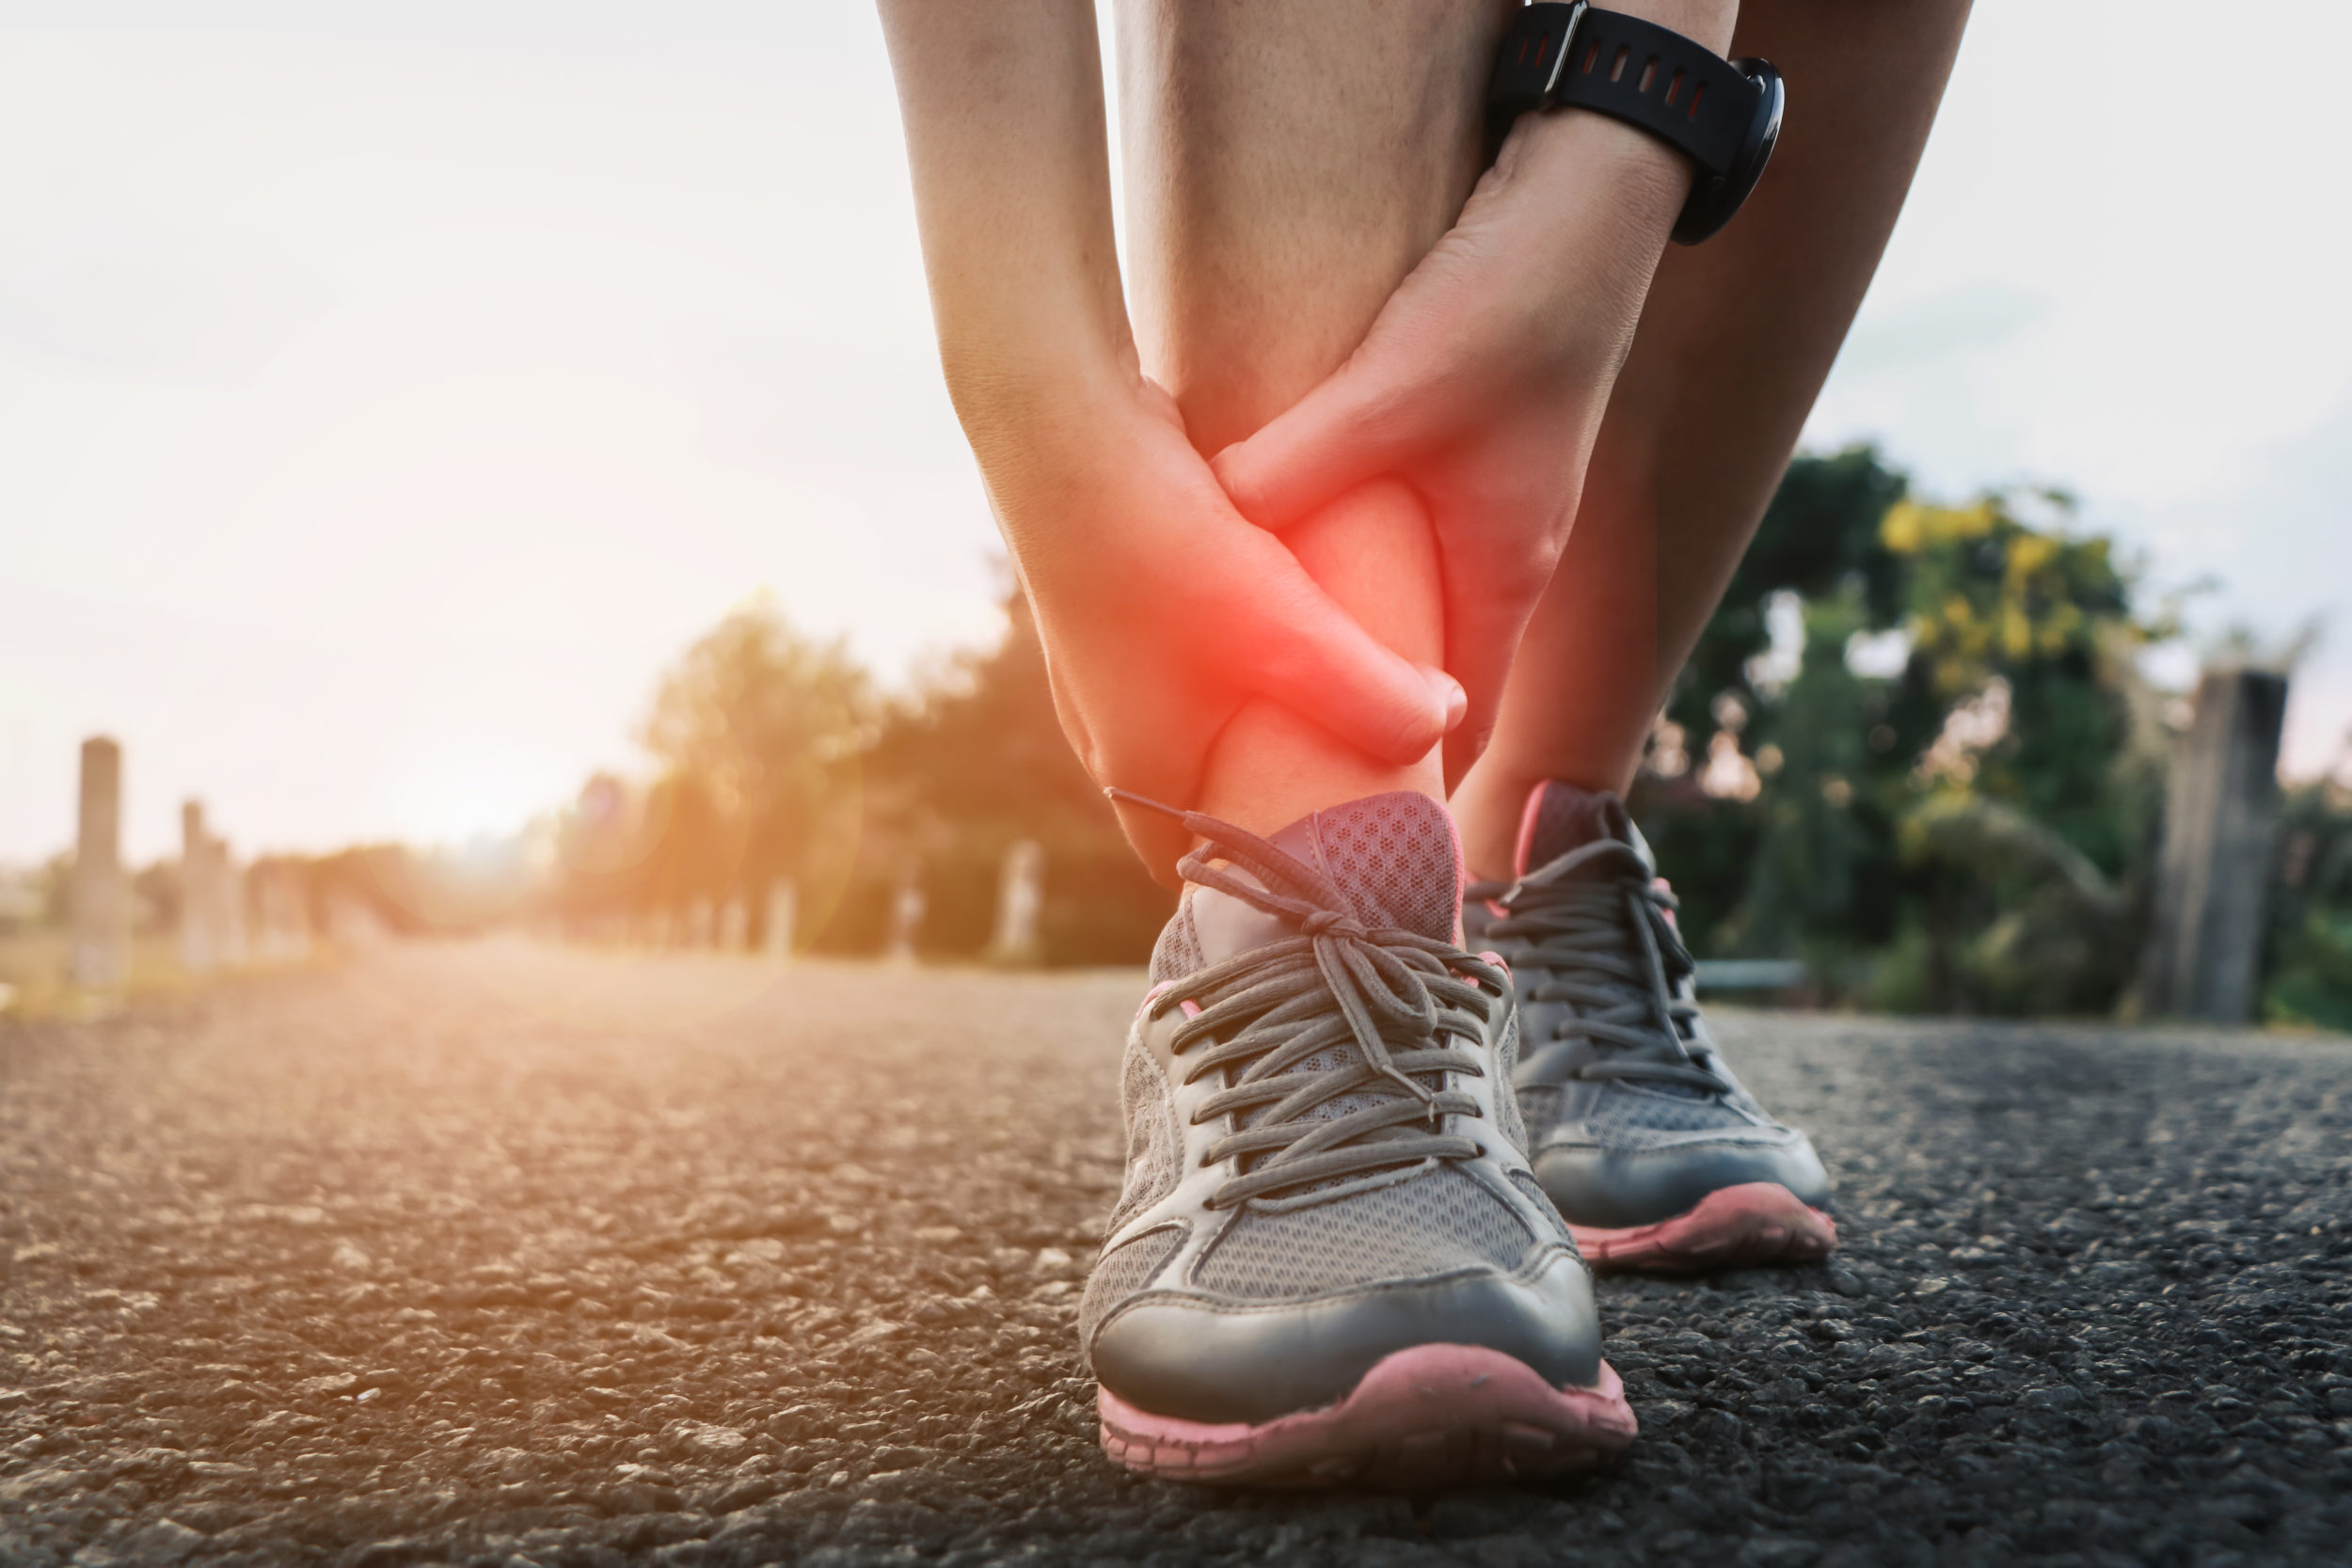 Sports Injuries Treatment in North Hollywood, Los Angeles & Echo Park - Urgent Orthopaedic Care